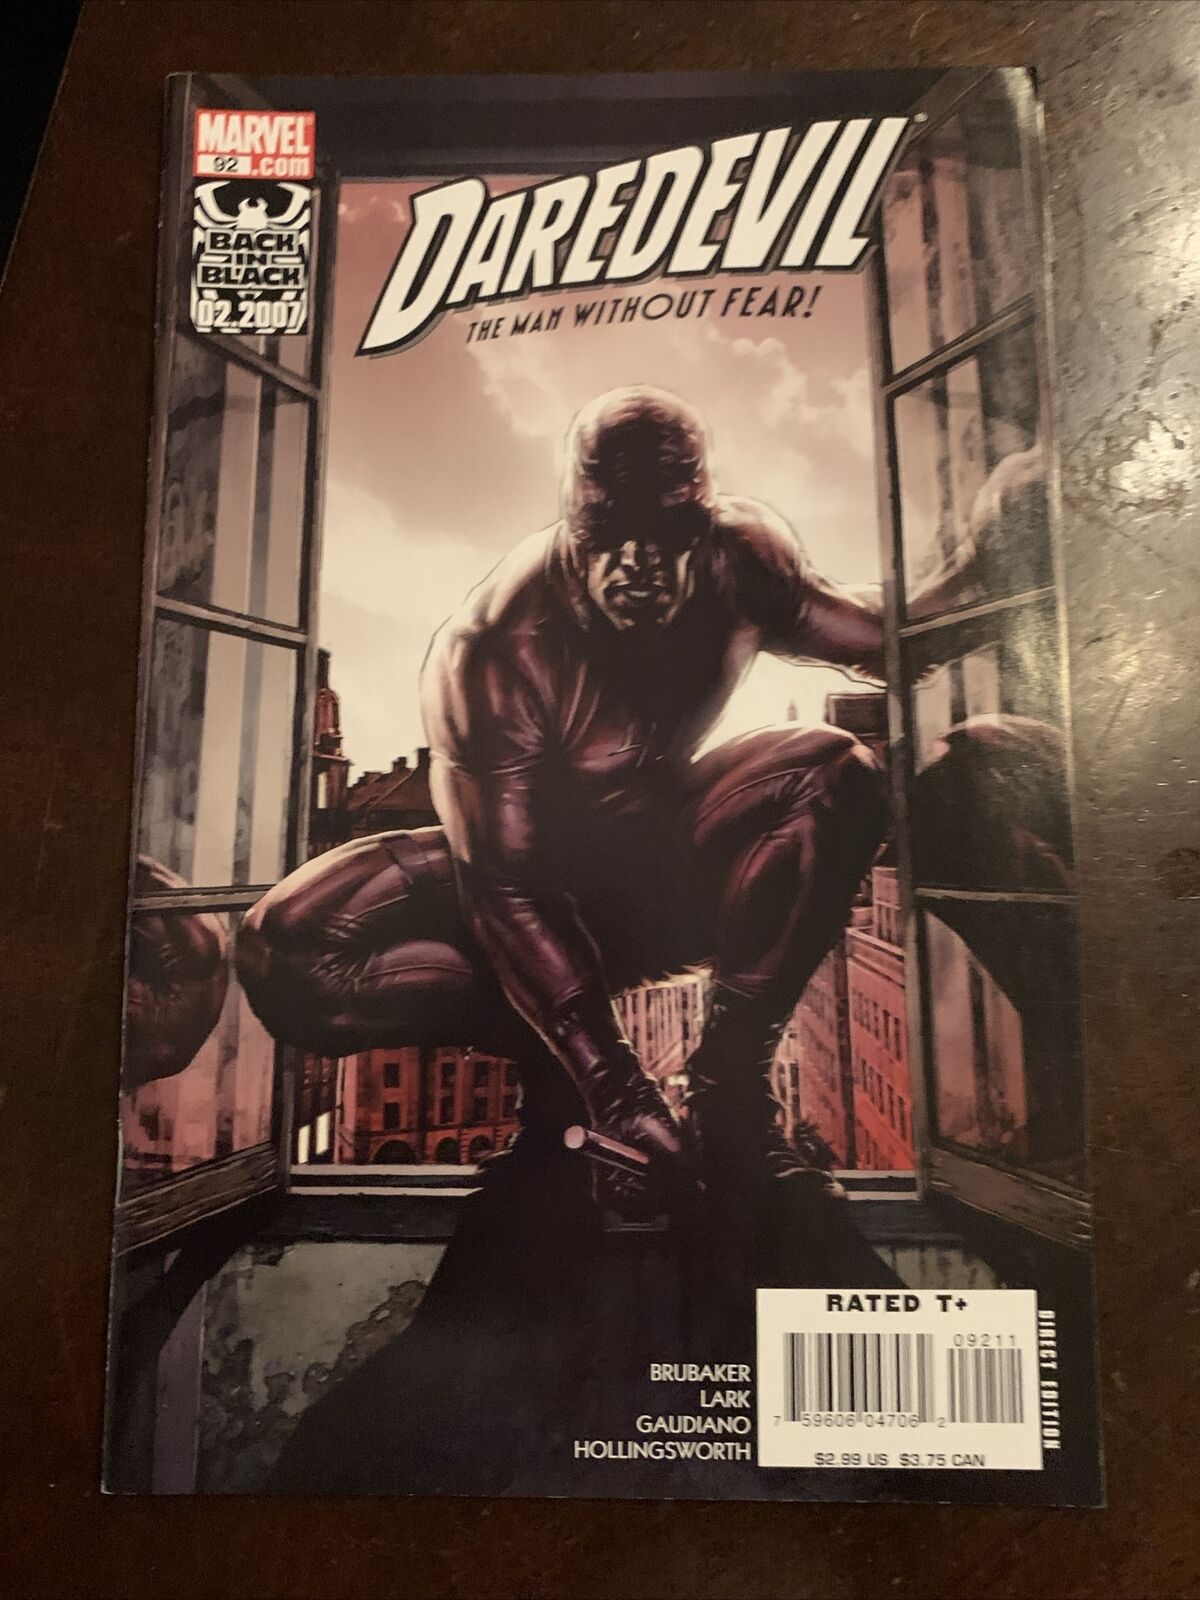 Daredevil (Marvel), #92-100, VF-NM (#91 is VG), Beautiful Condition, Fast Ship